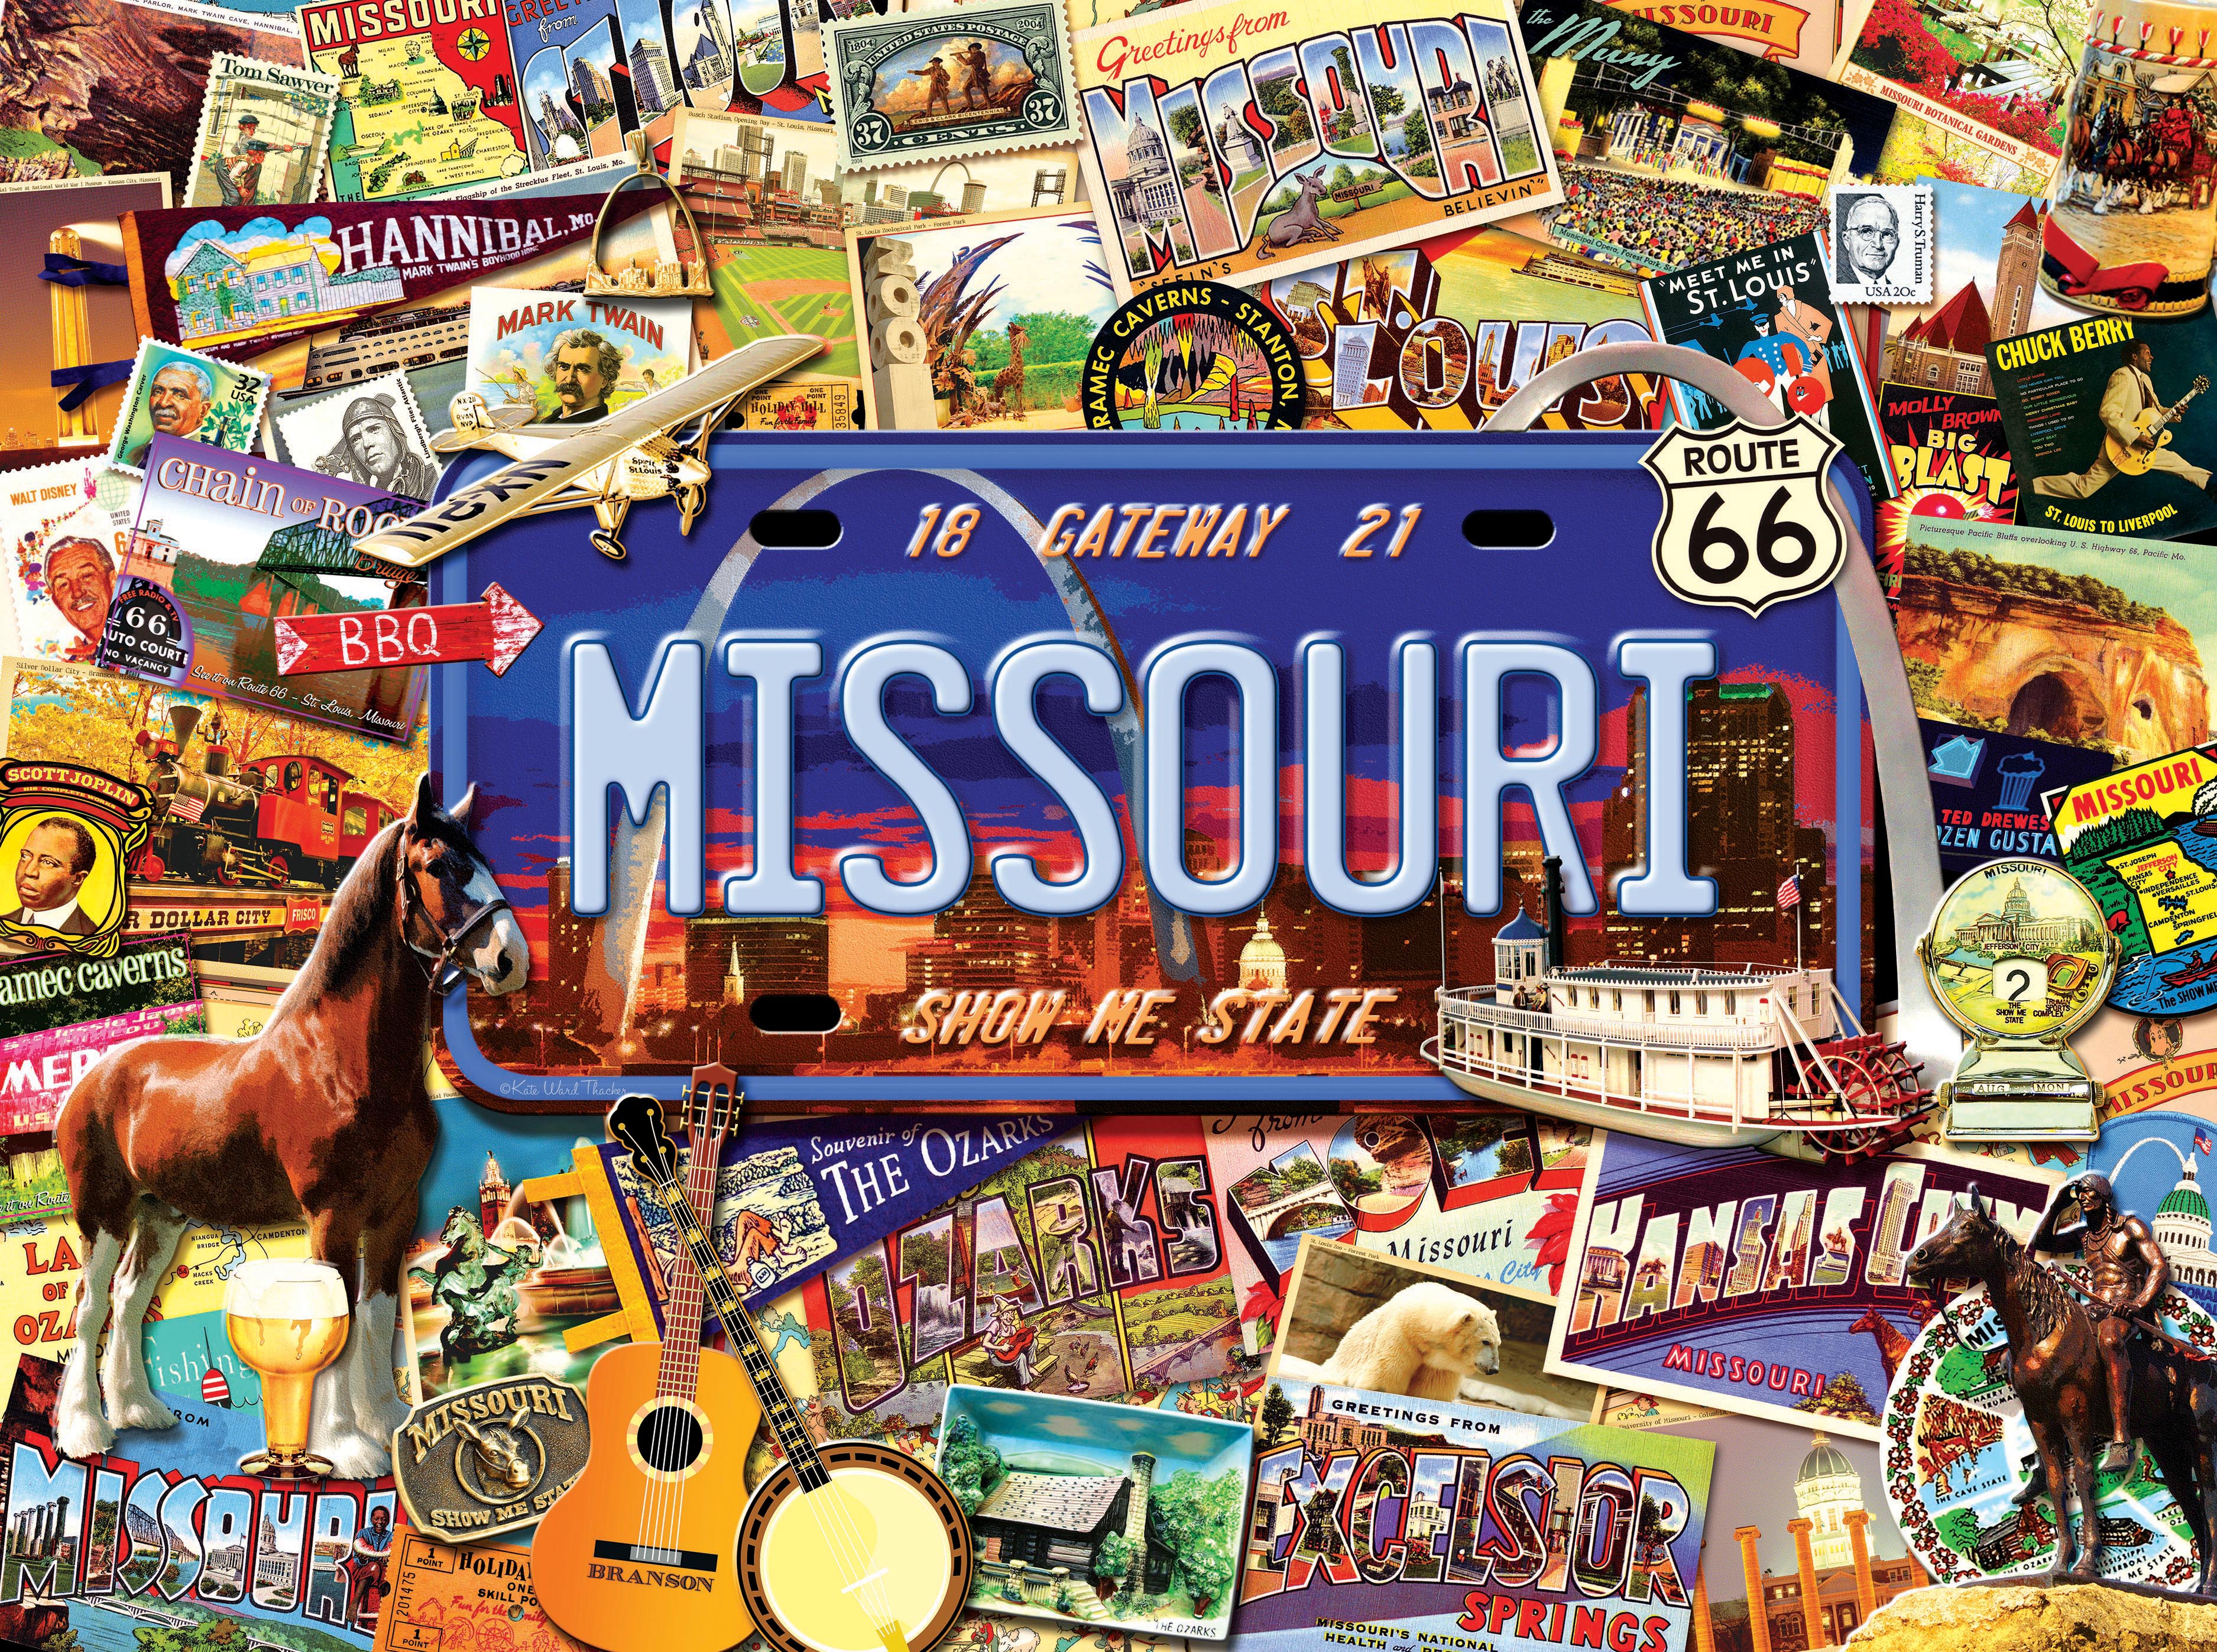 Missouri: The "Show Me" State (1000 pc puzzle)